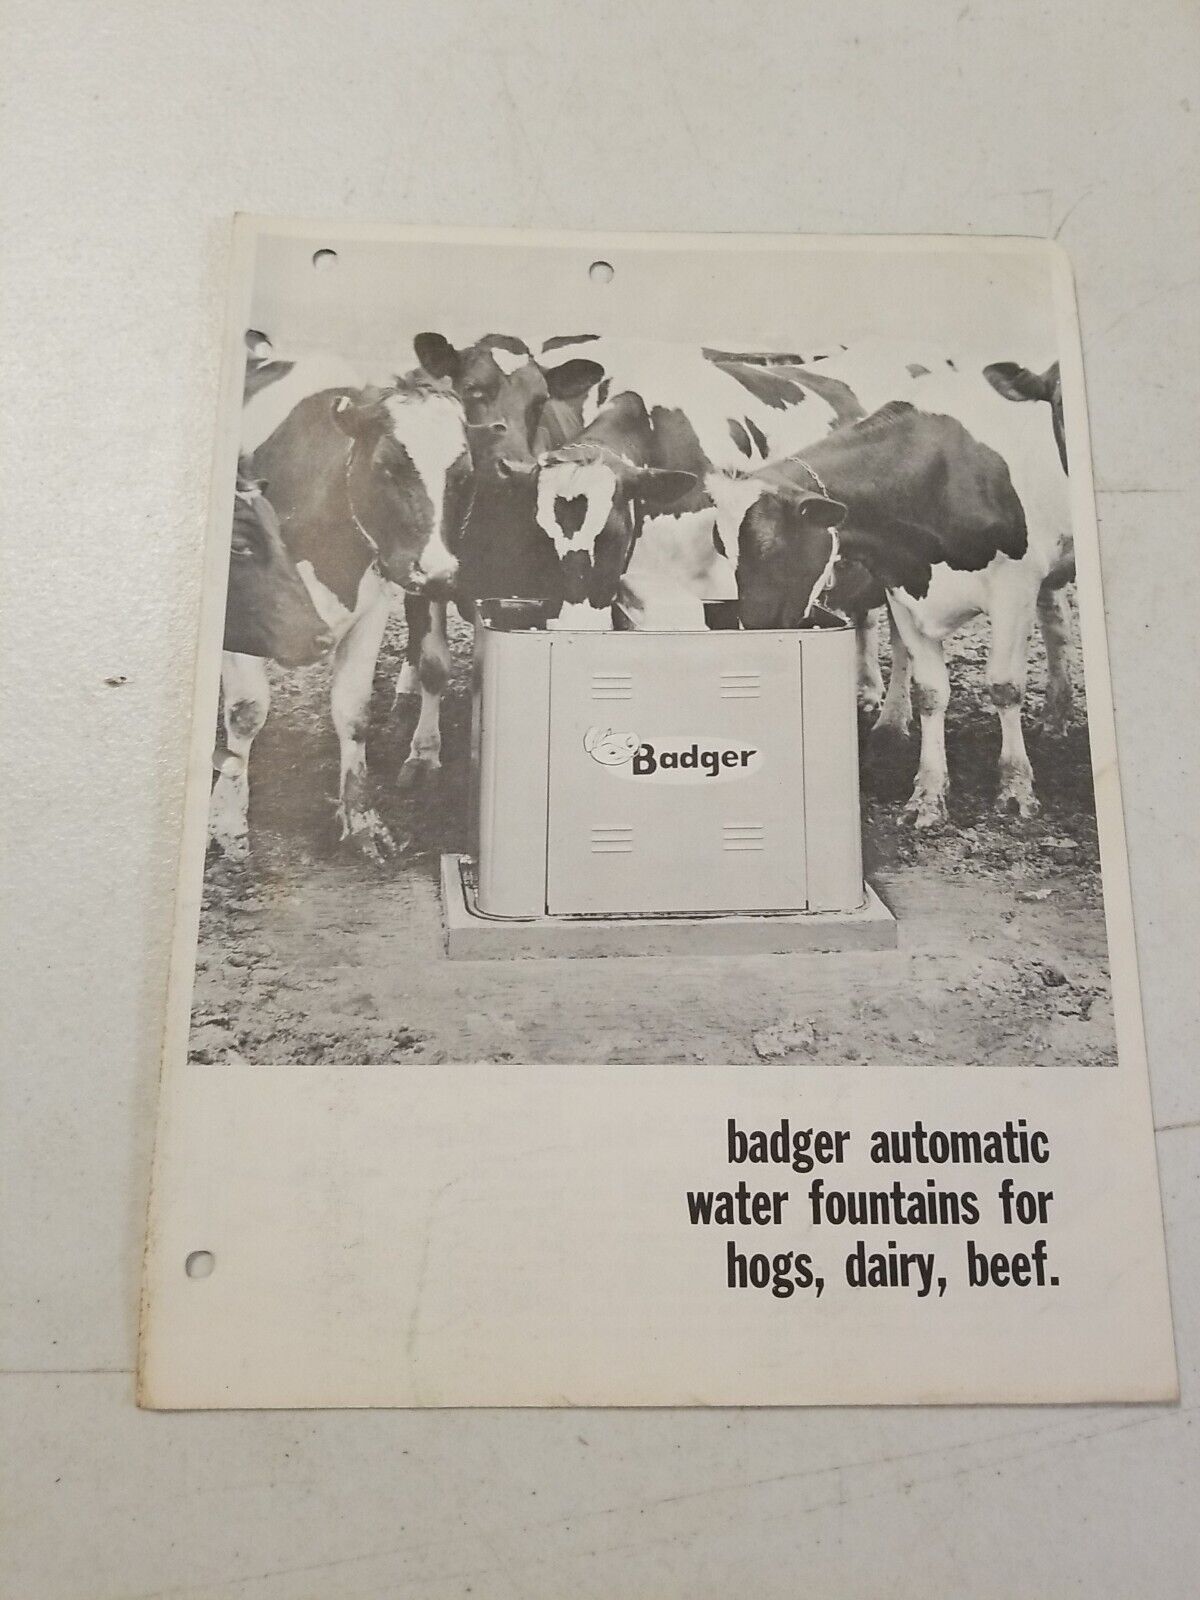 Vintage Badger Automatic Water Fountains for Hogs & Cows Brochure. Farming 